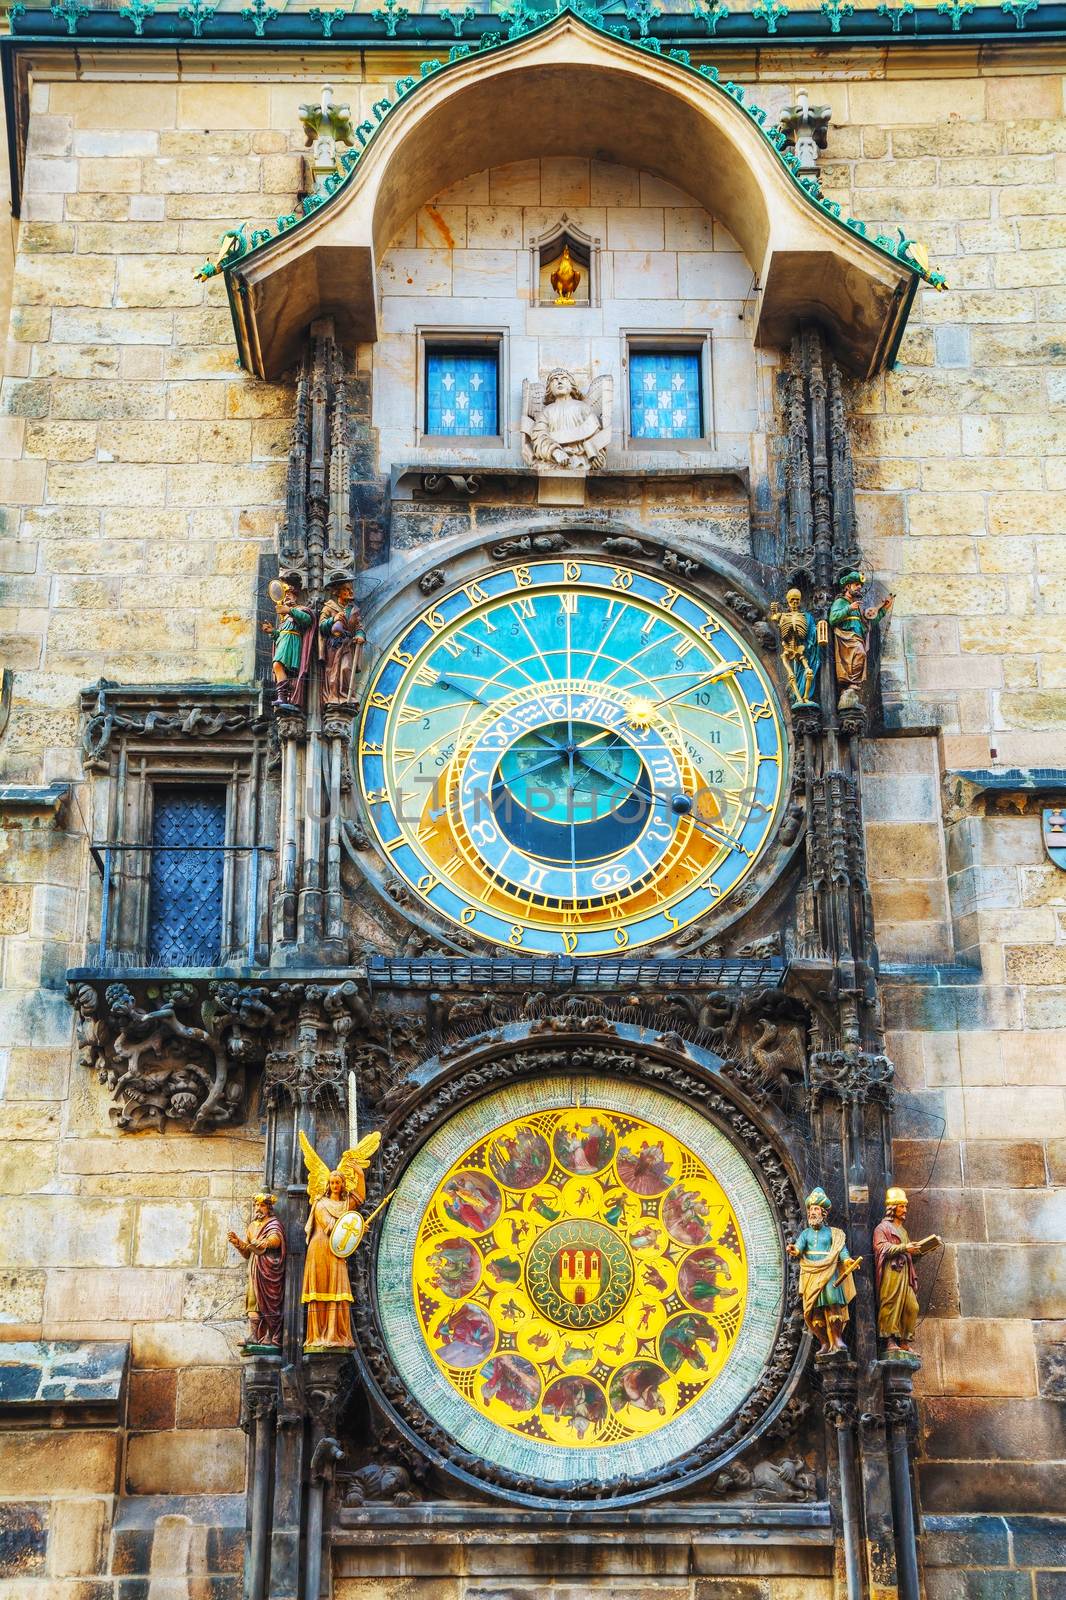 The Prague Astronomical Clock at Old City Hall in Prague